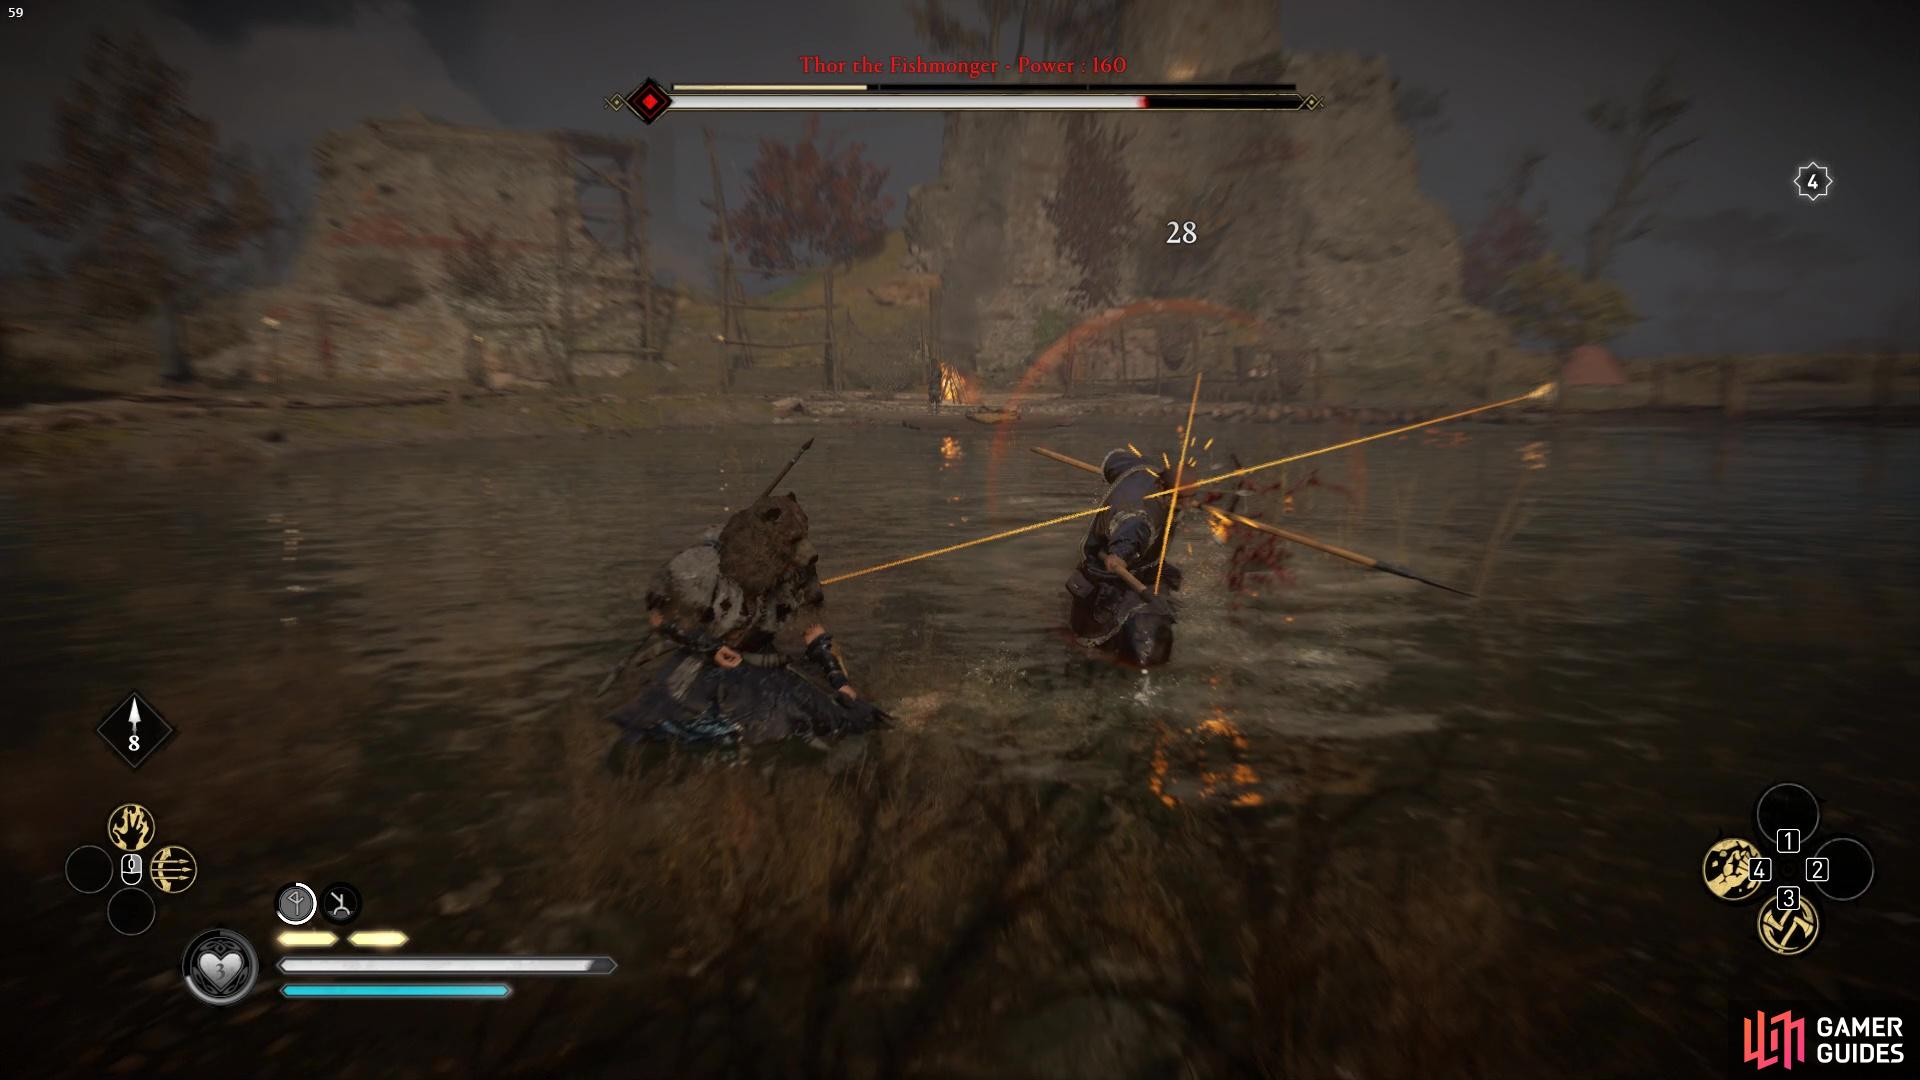 You can parry or dodge Thor's orange attacks.